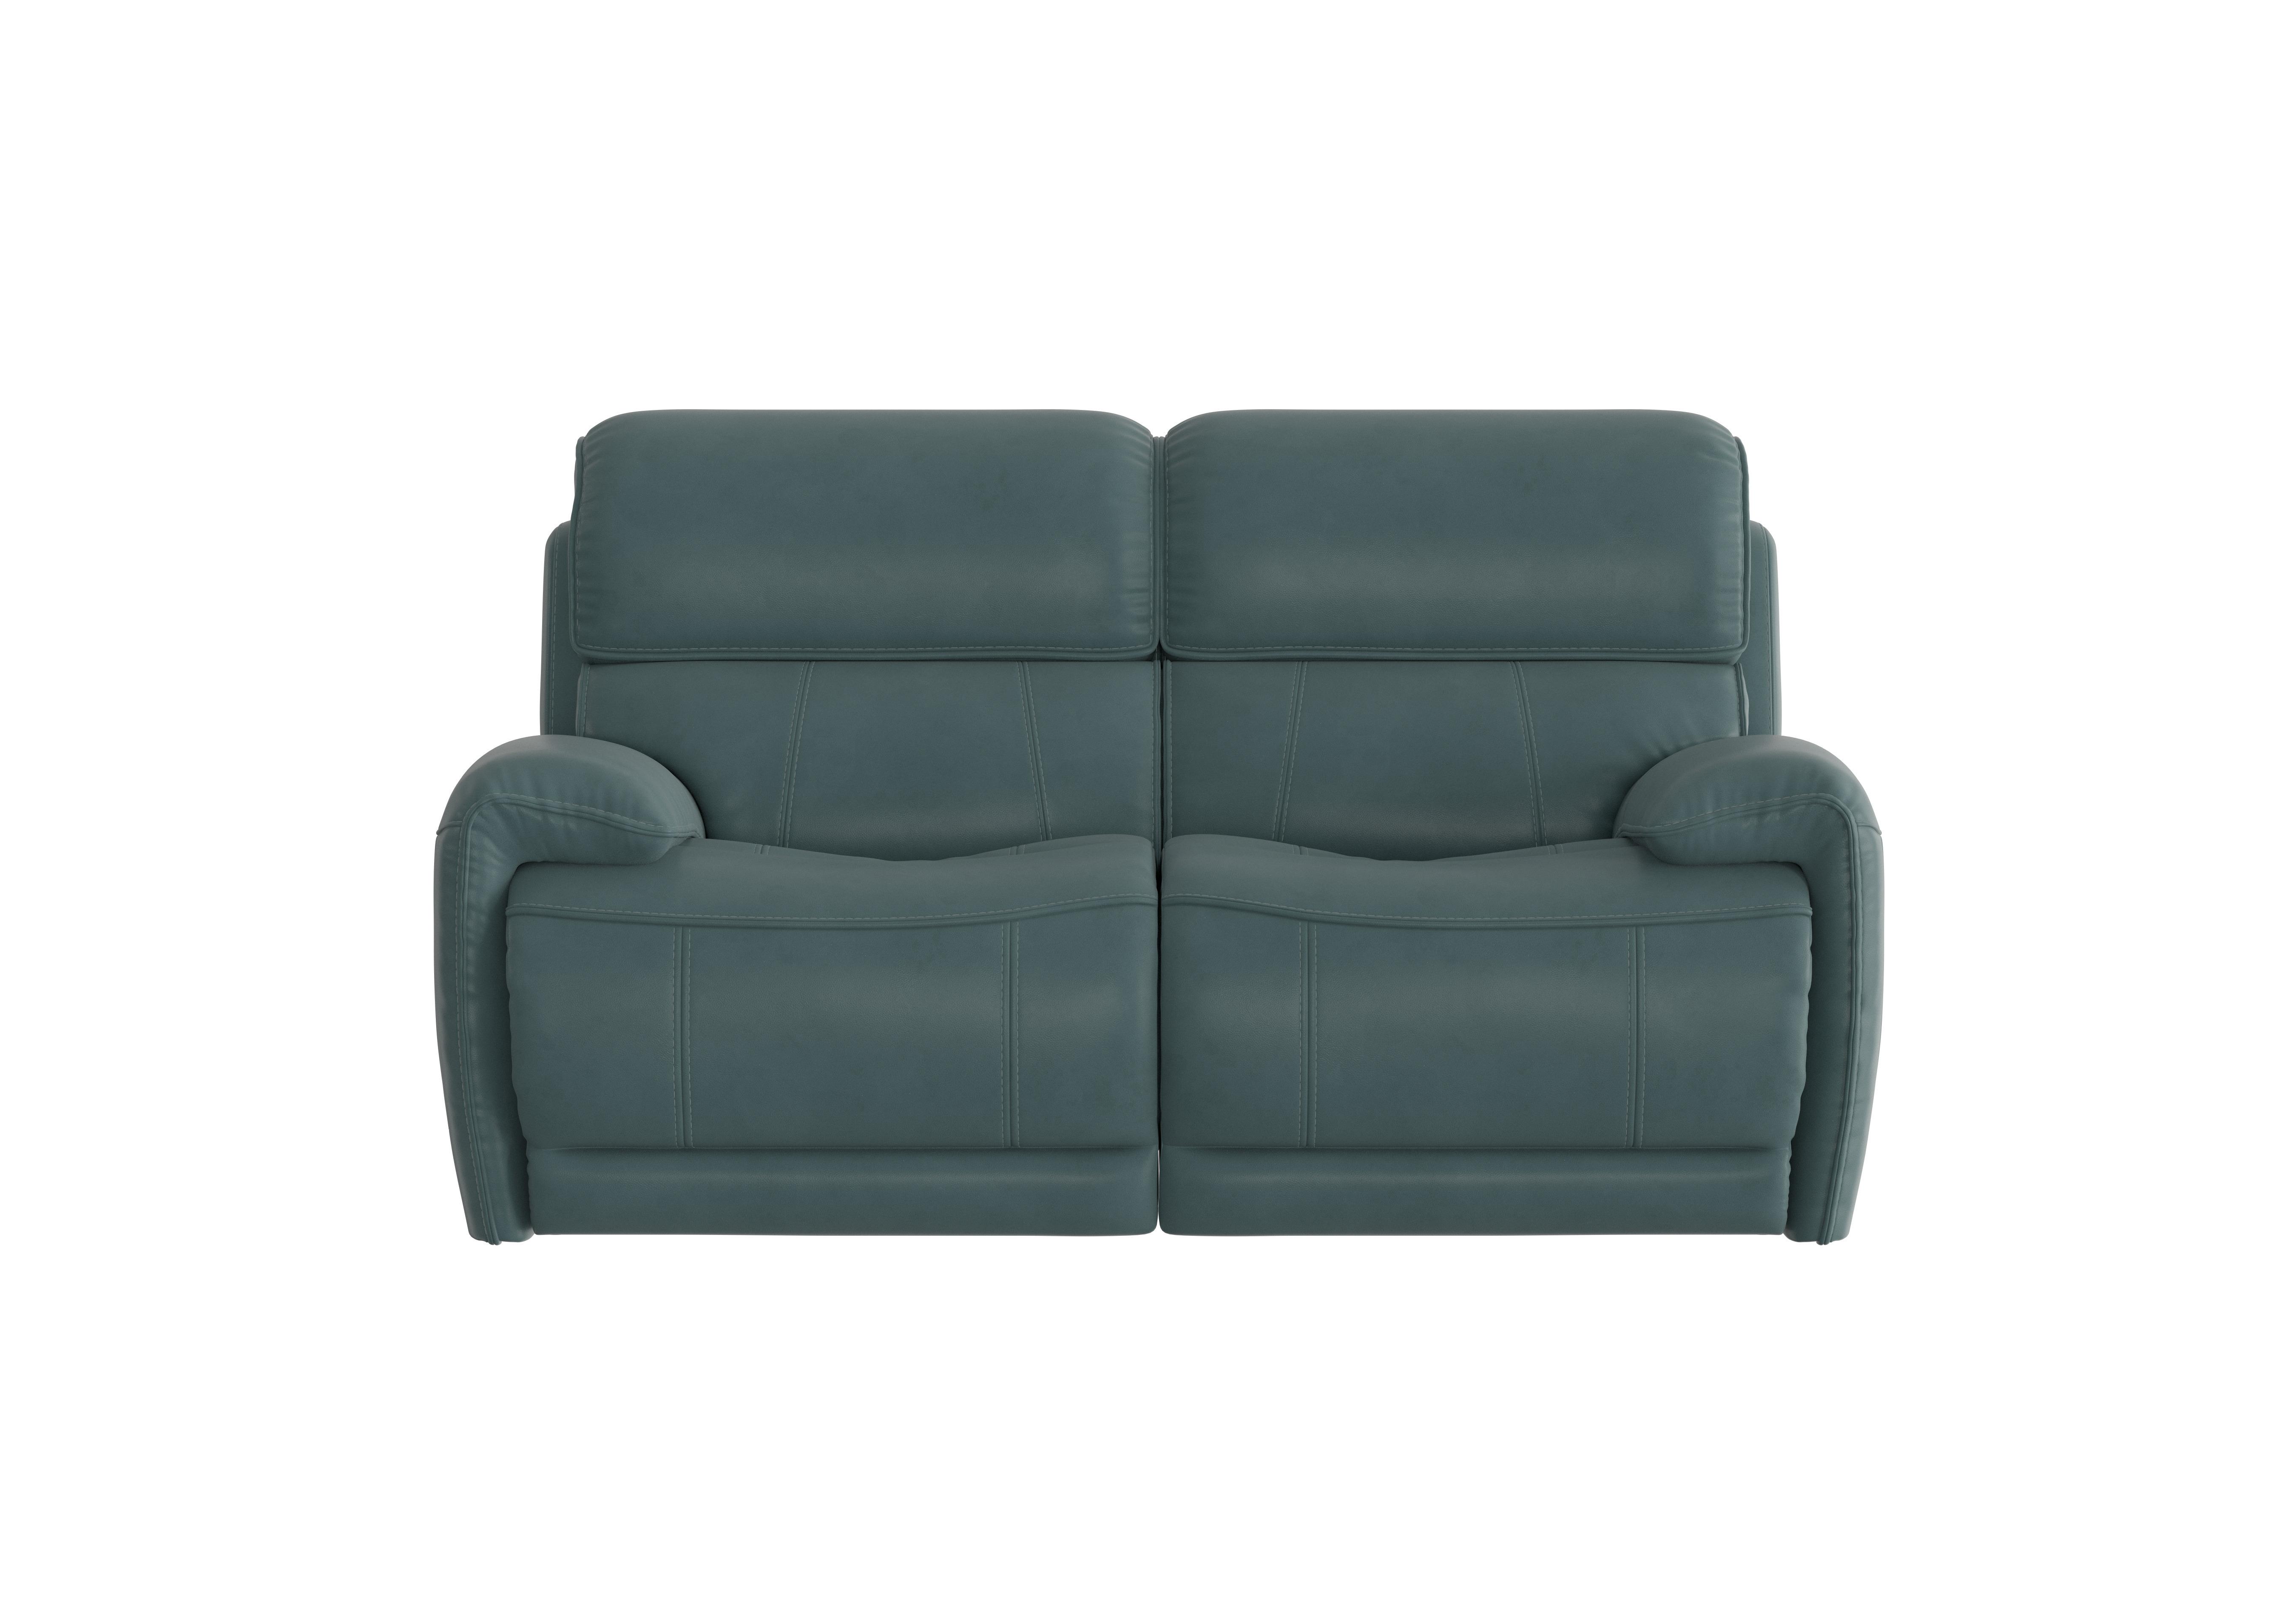 Link 2 Seater Leather Power Recliner Sofa with Power Headrests in Bv-301e Lake Green on Furniture Village